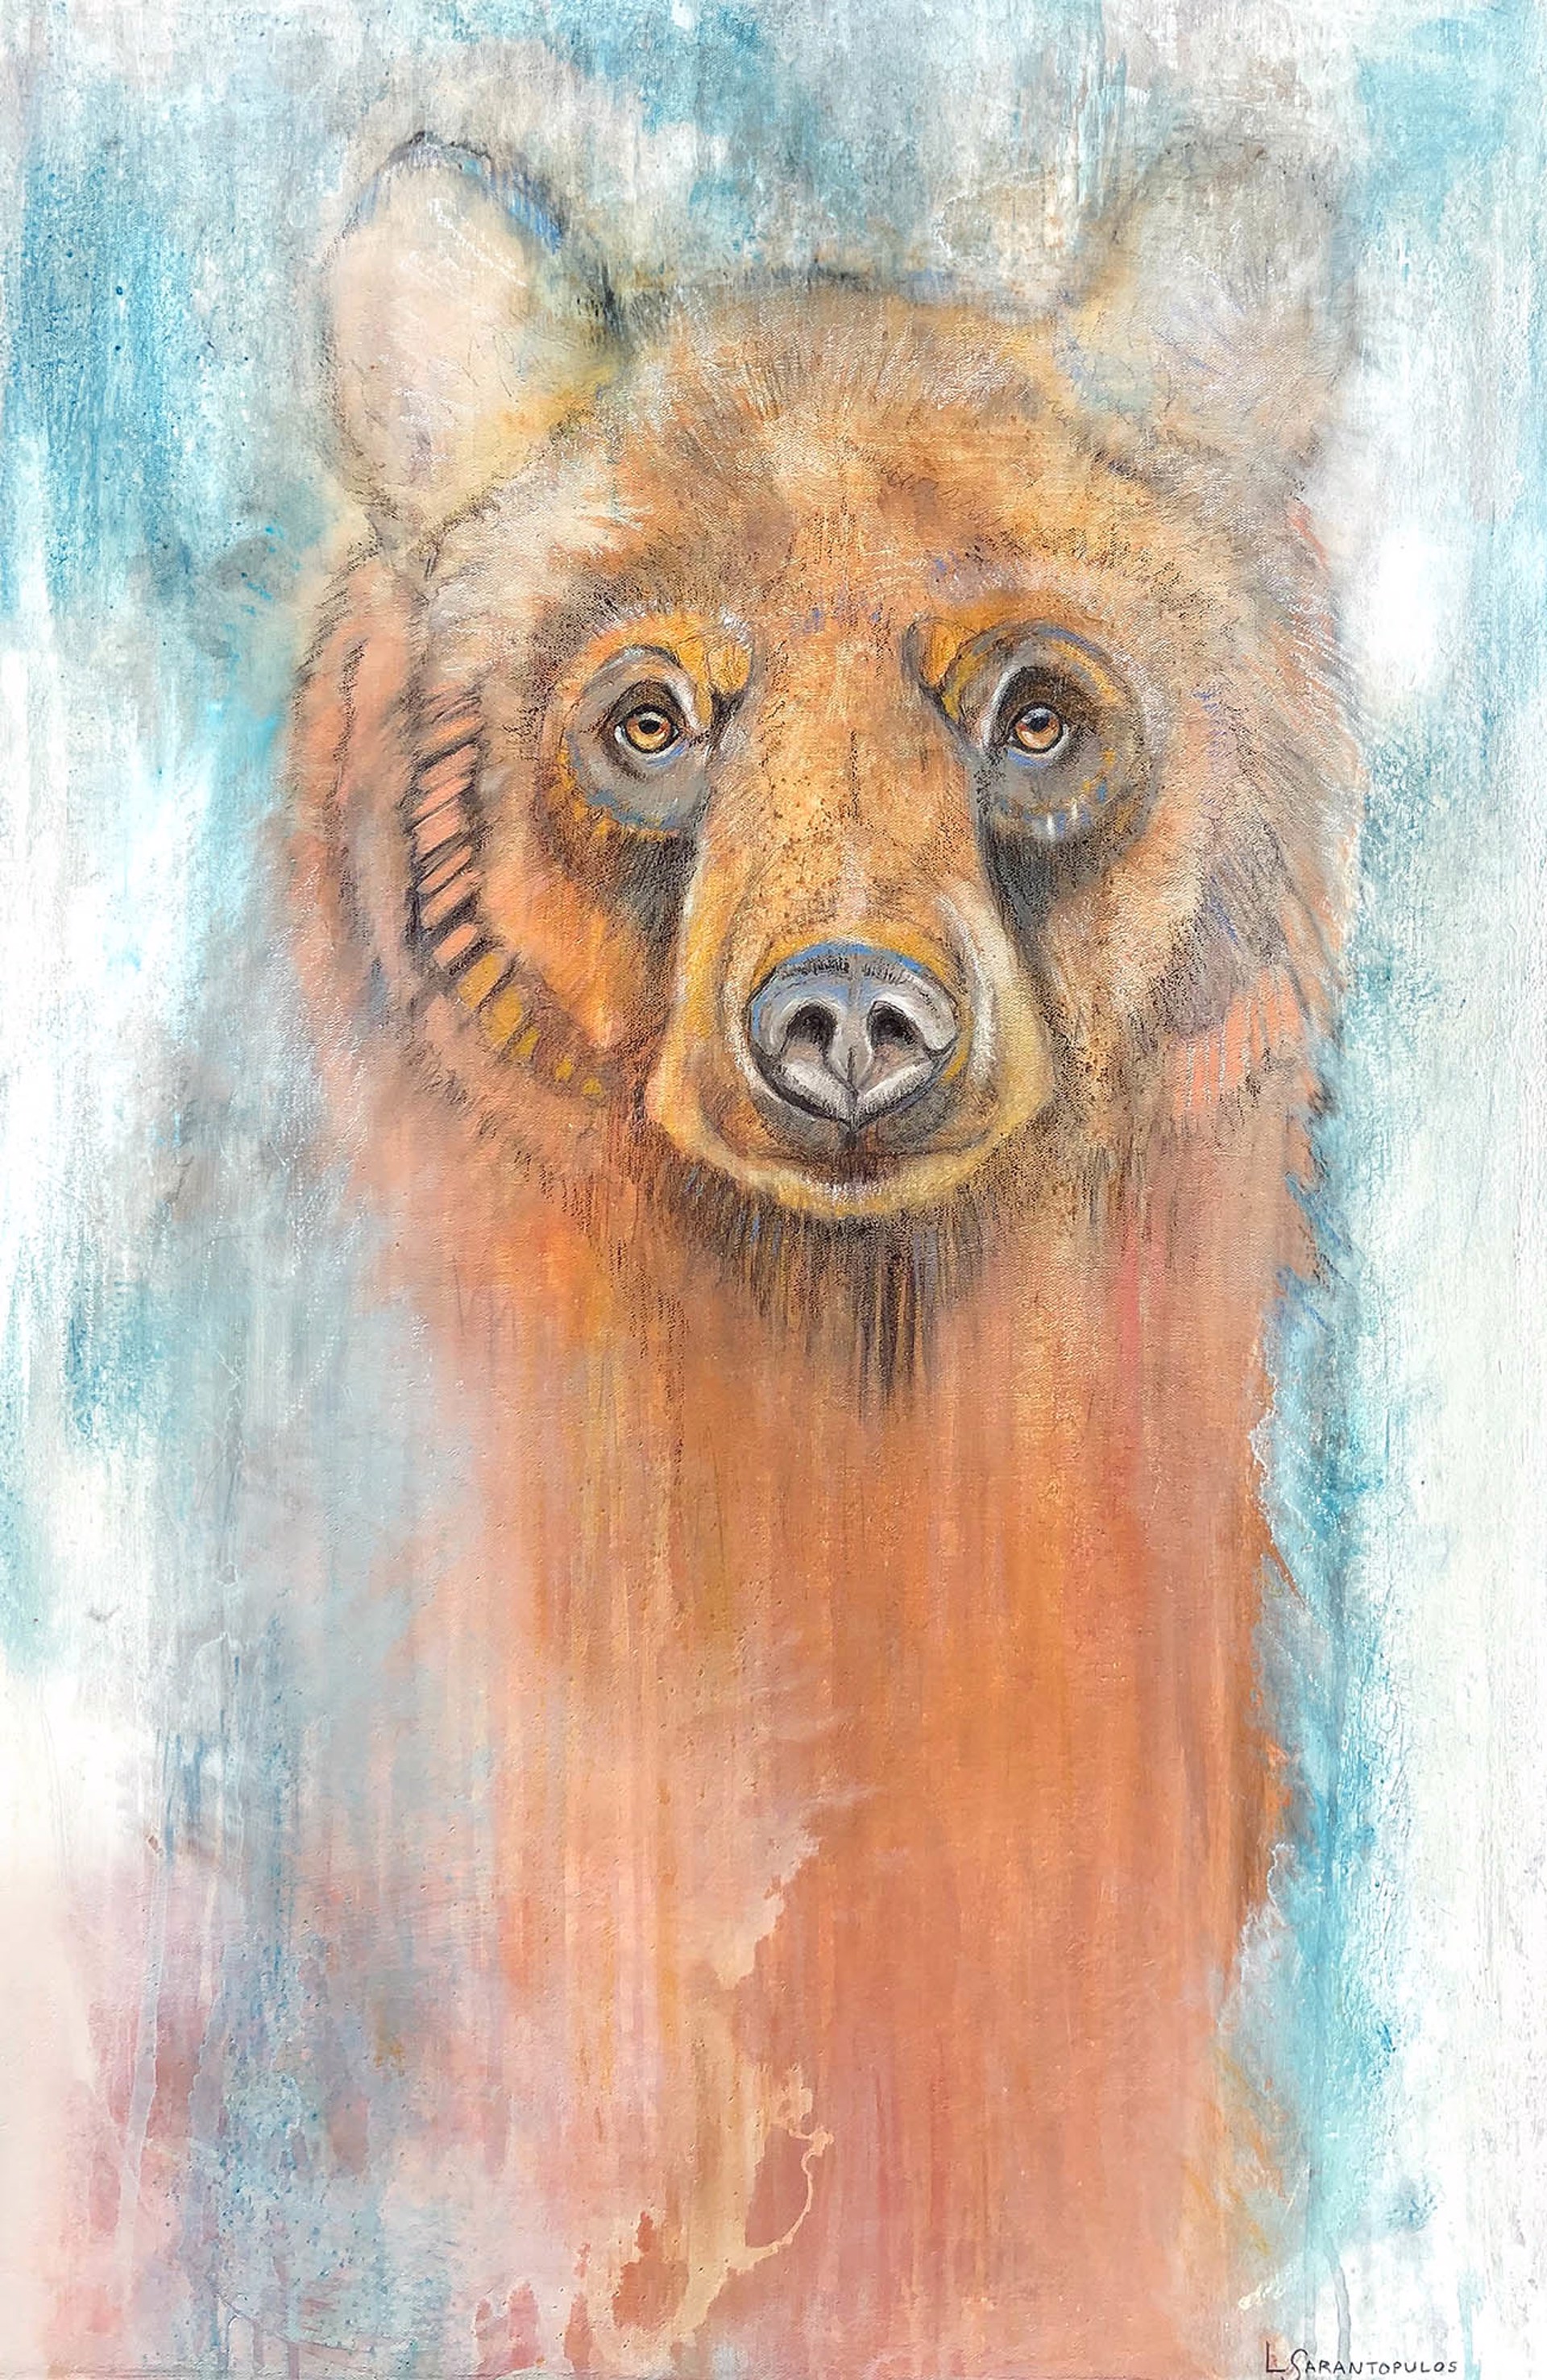 Original Mixed Media Painting Featuring A Bear Portrait In Orange Over Turquoise Background